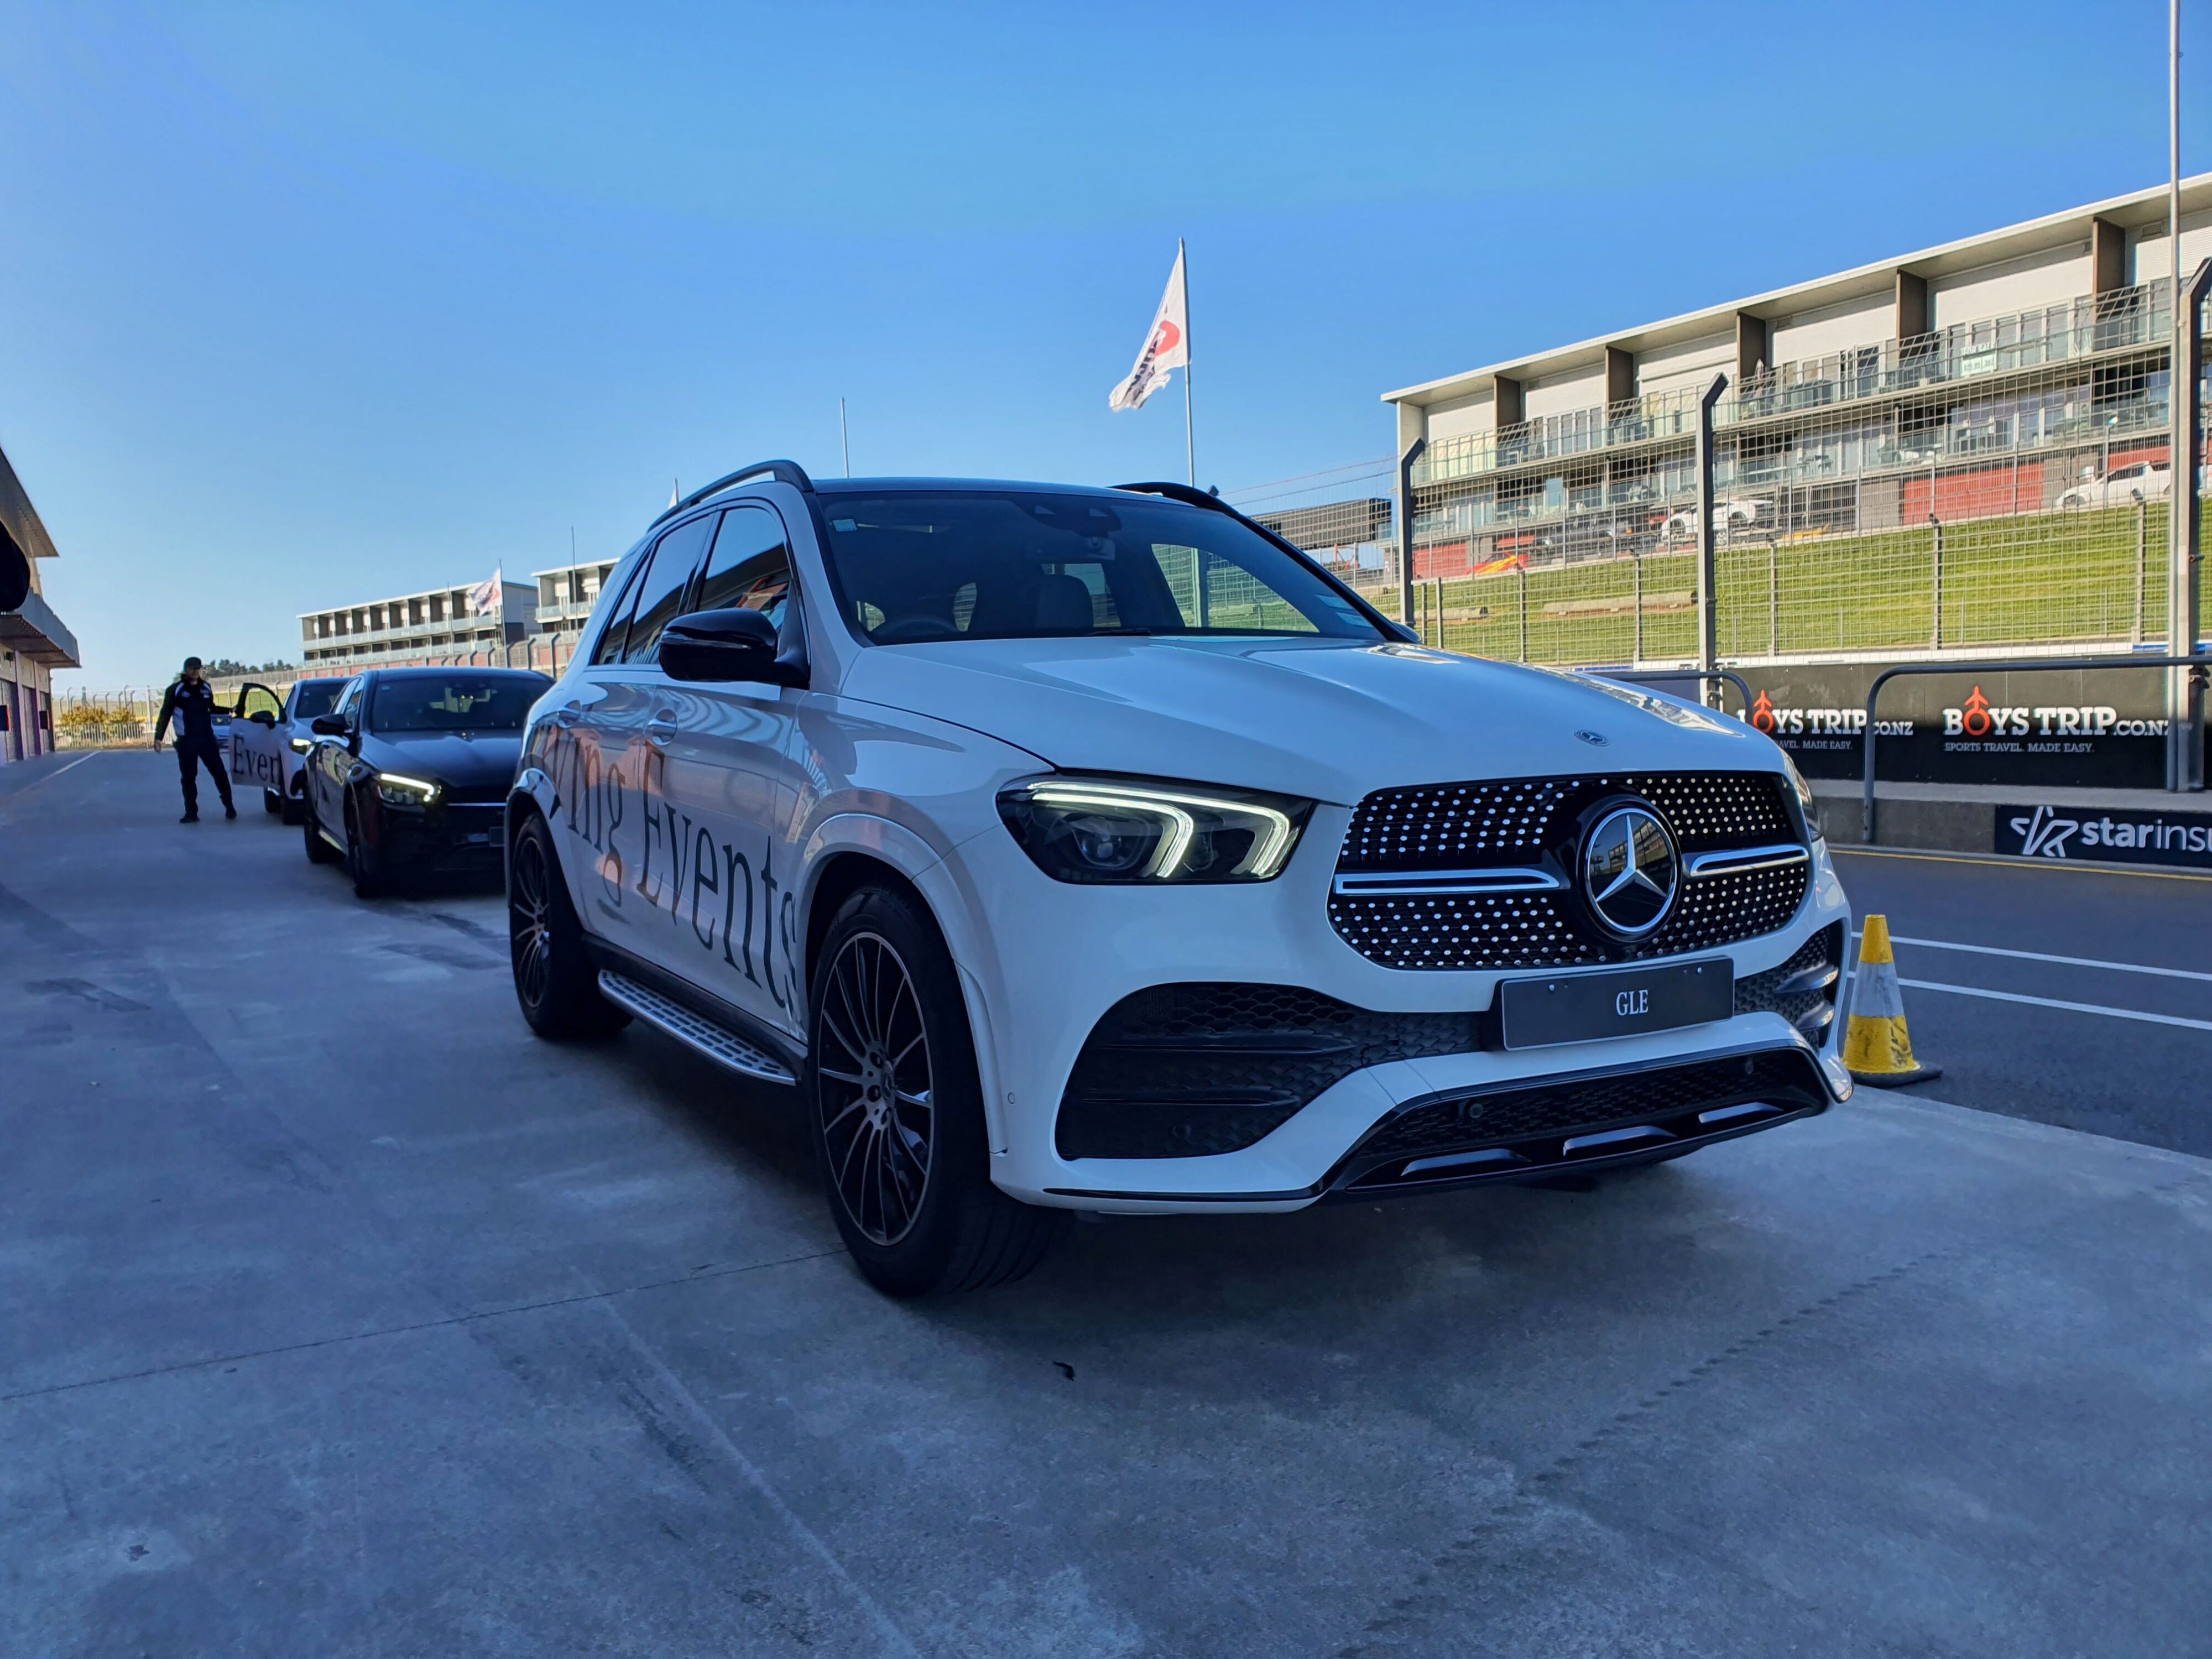 A Mercedes GLE SUV in the foreground with other Mercedes-Benz passenger cars in the background at Mercedes' Driving Events at Hampton Downs Motorsport Park NZ